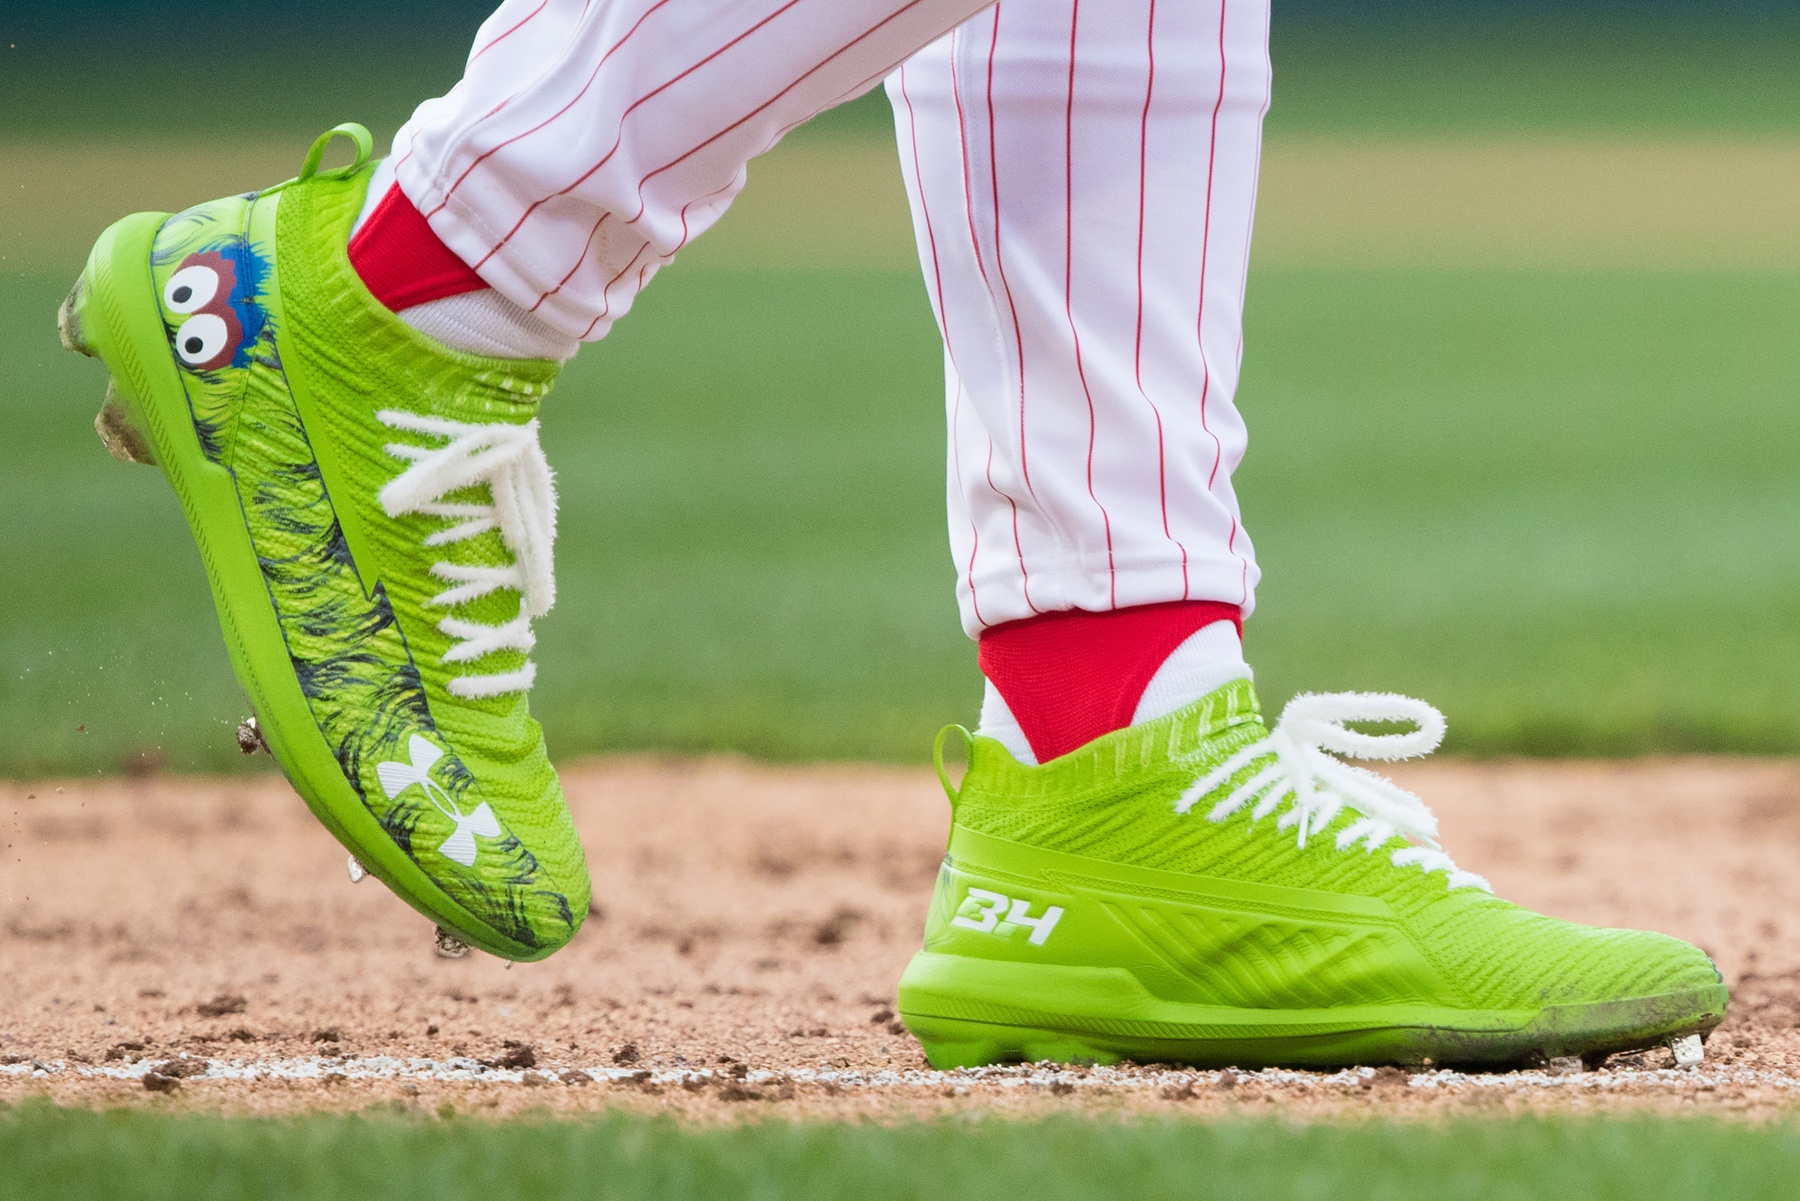 Phillie Phanatic returns love to Bryce Harper with Harper shoes